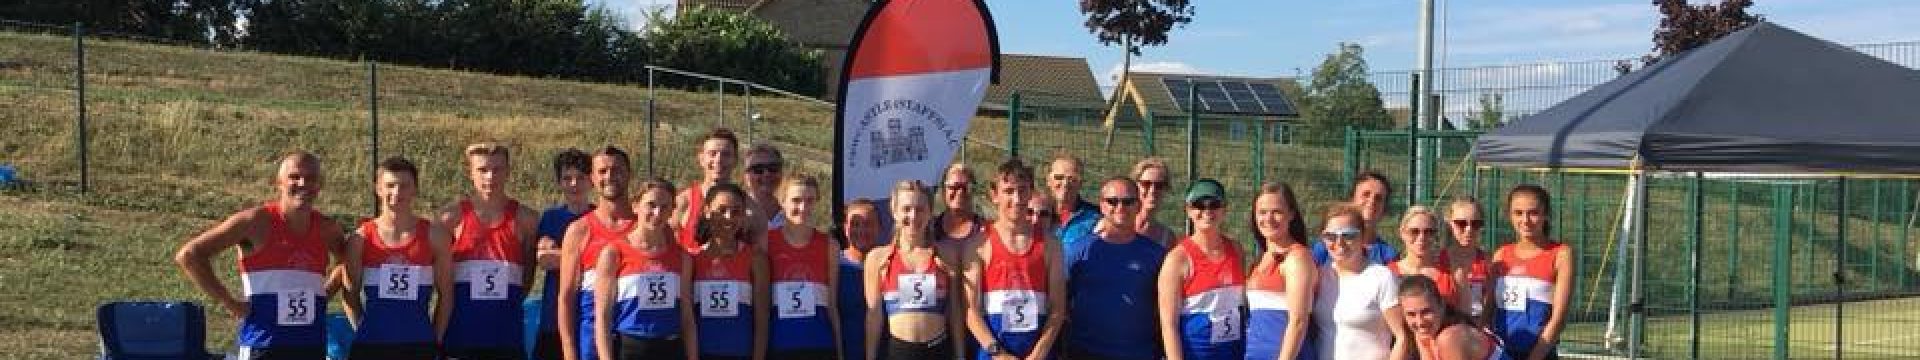 North Staffs Cross Country League Race 2 @ Stafford Common – 26/10/2019